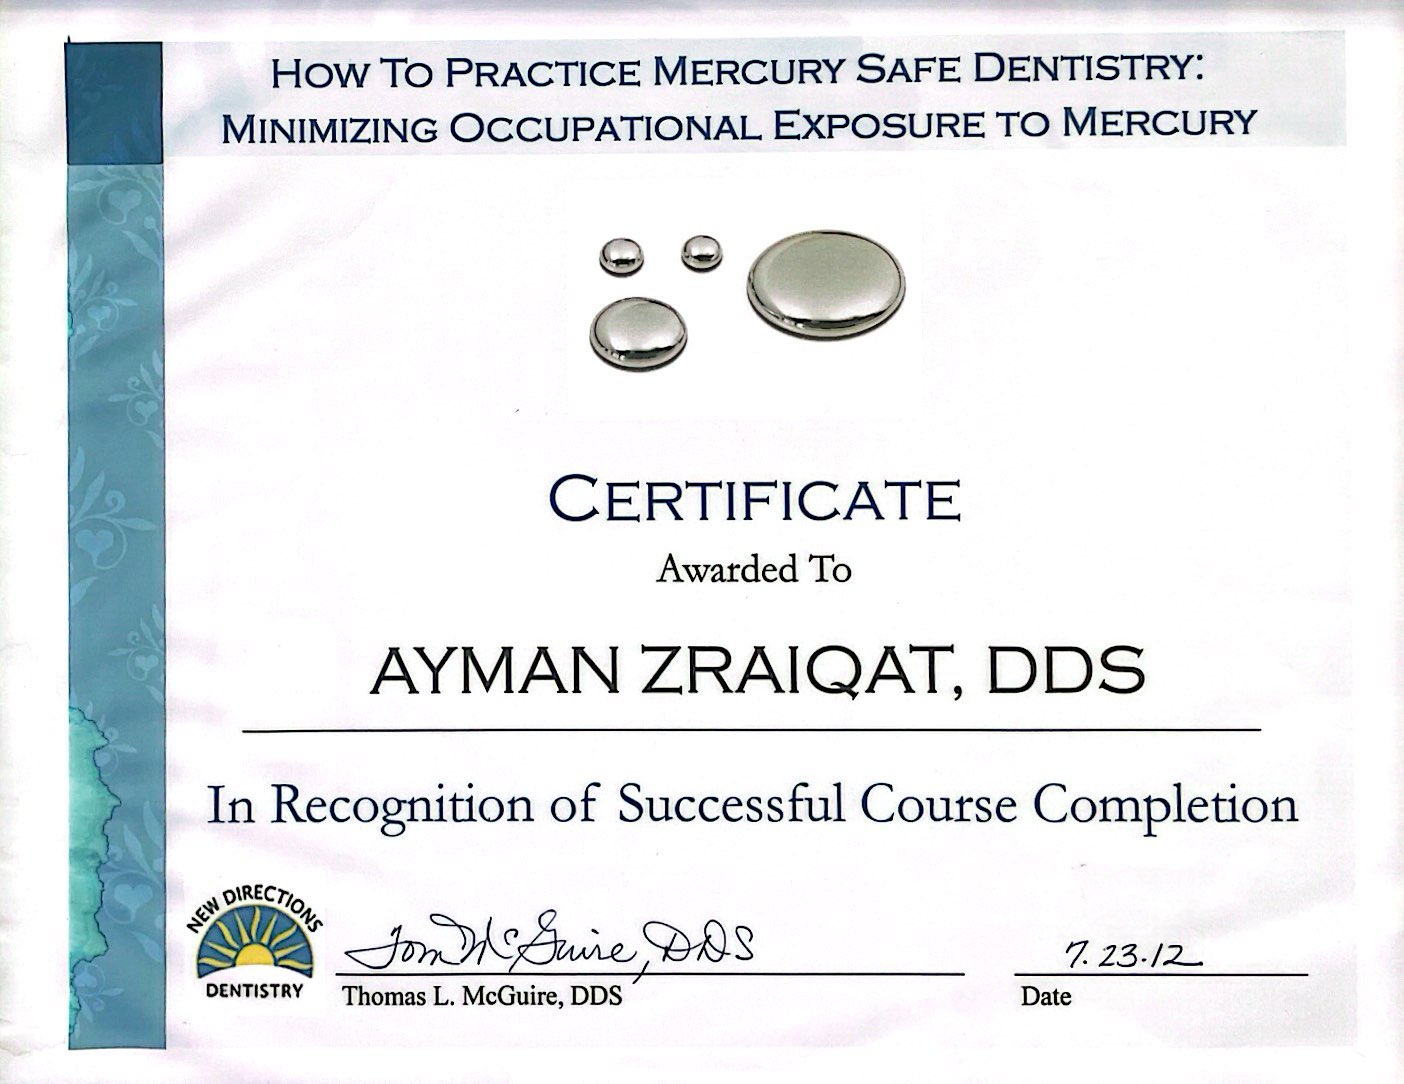 Certificate awarded to Ayman Zraiqat, DDS, for completing a course on mercury safe dentistry. Dated July 23, 2012.